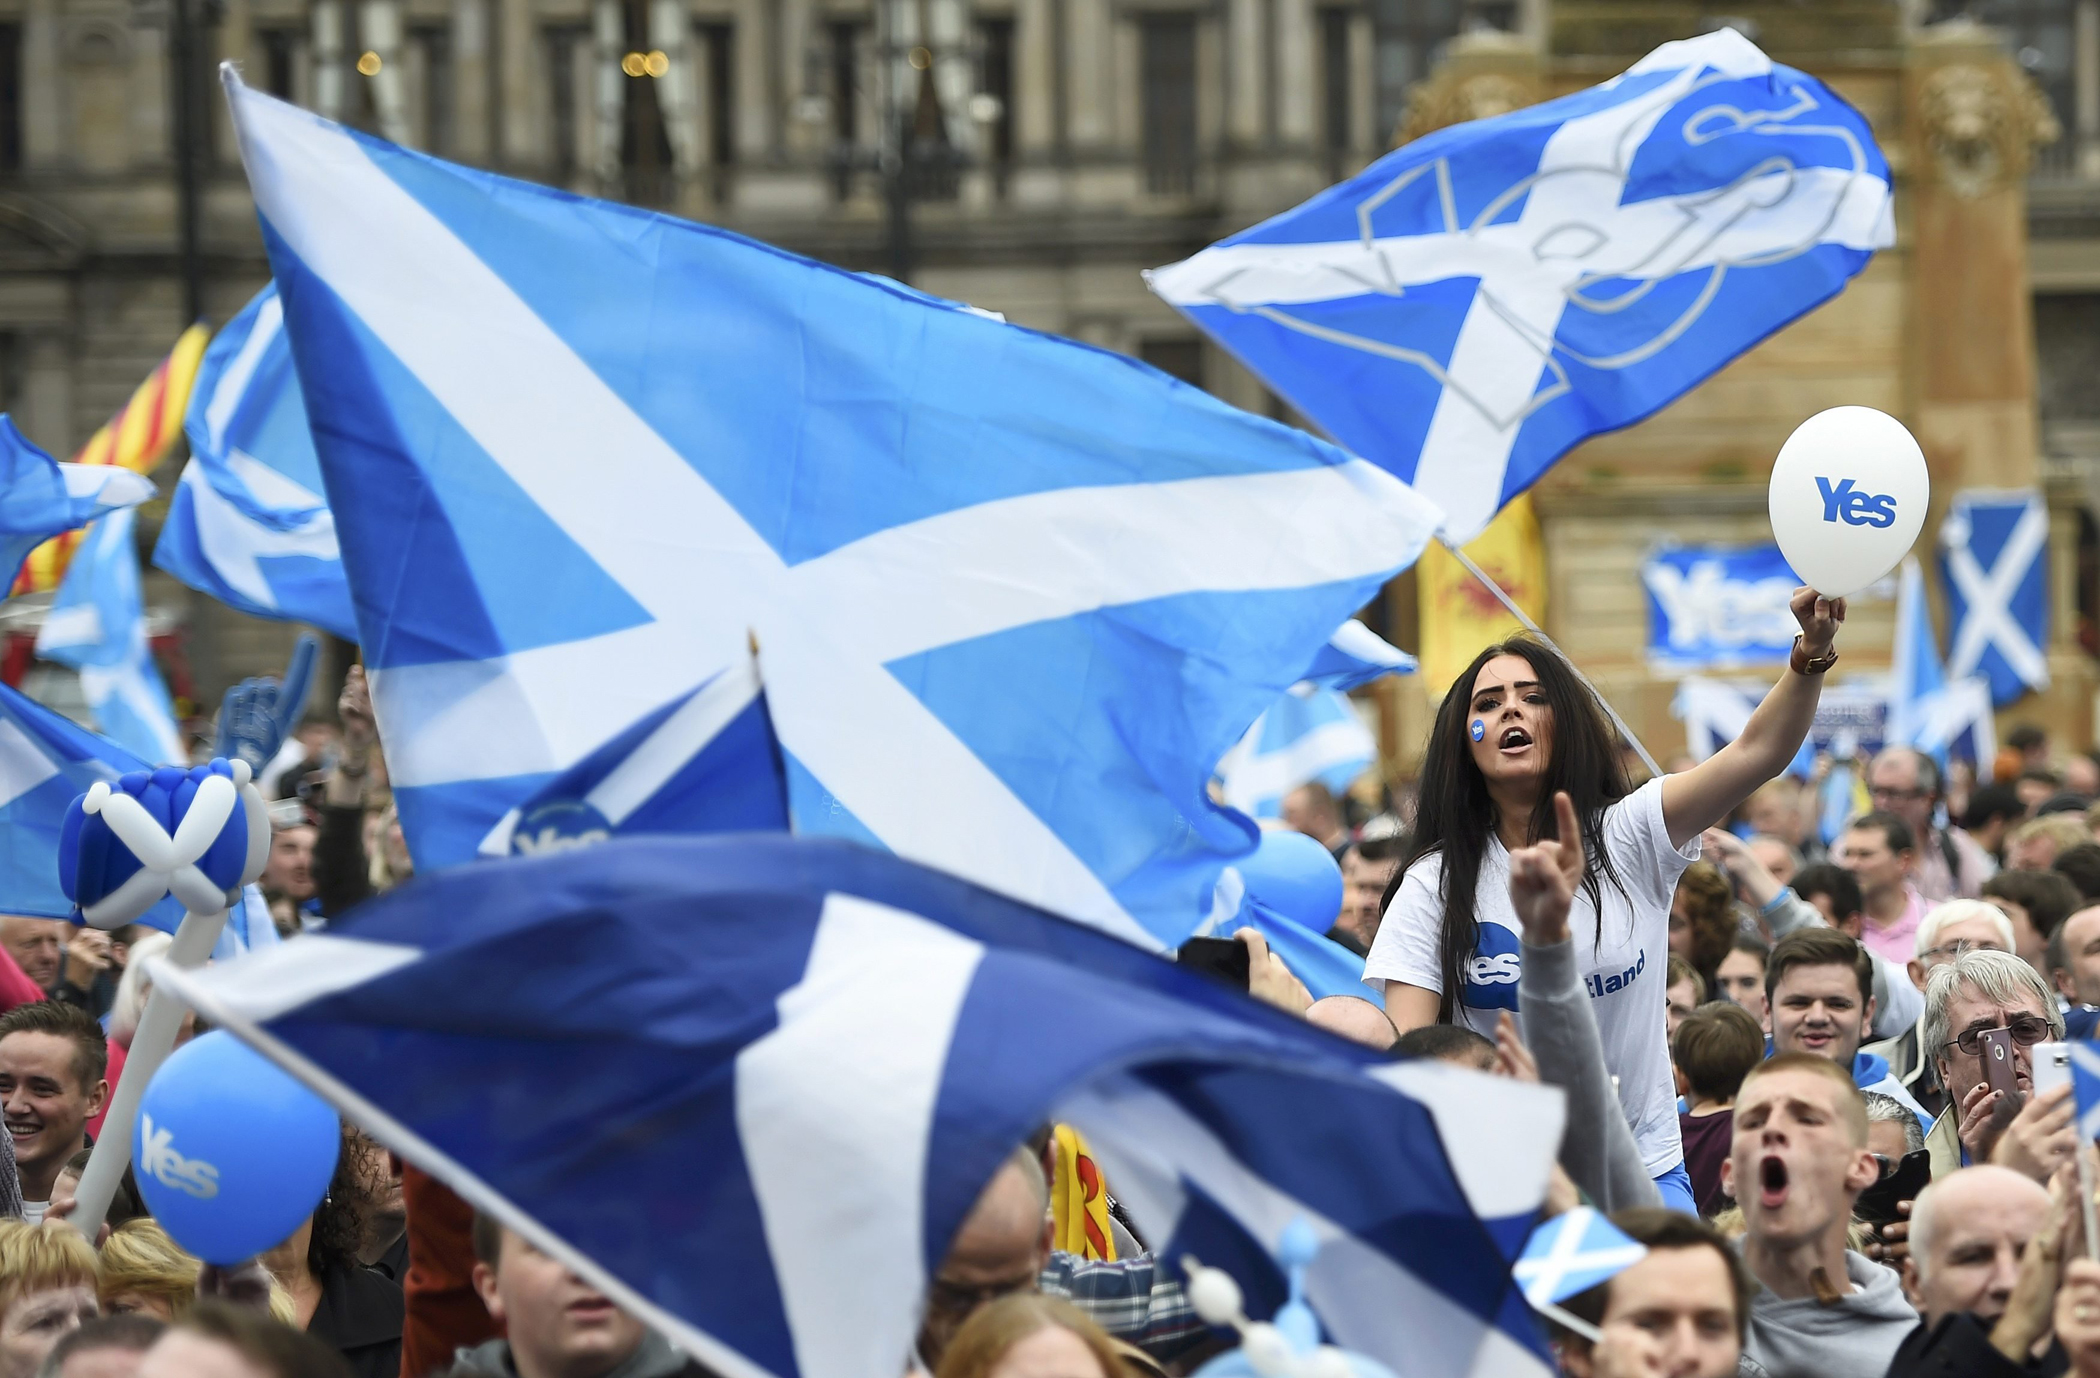 Campaigners wave Scottish Saltires at a 'Yes' campaign rally in Glasgow, Scotland, Sept. 17, 2014.